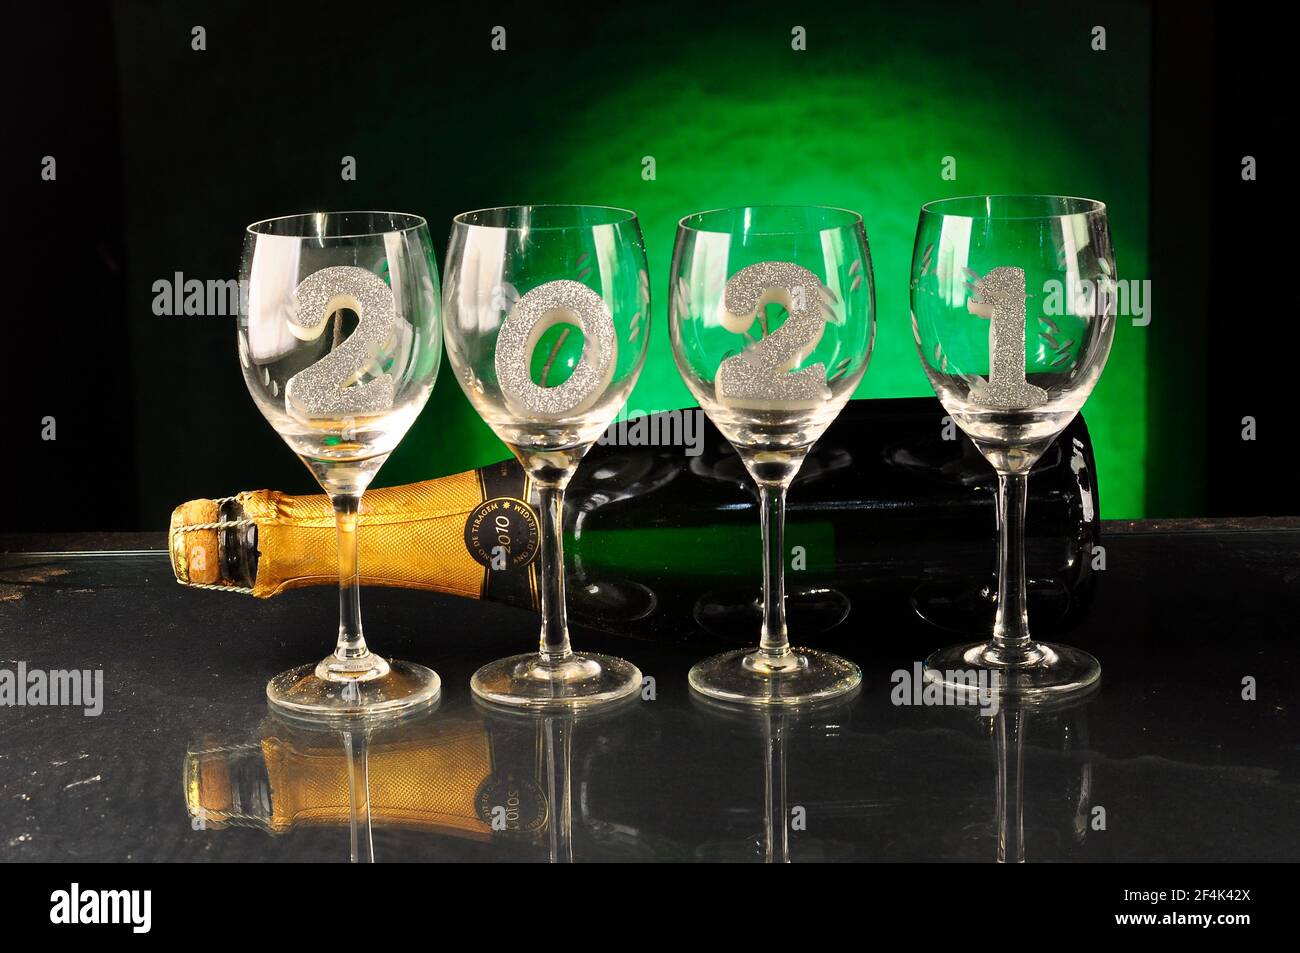 New Year 2021 on wine glasses near a champagne bottle Stock Photo